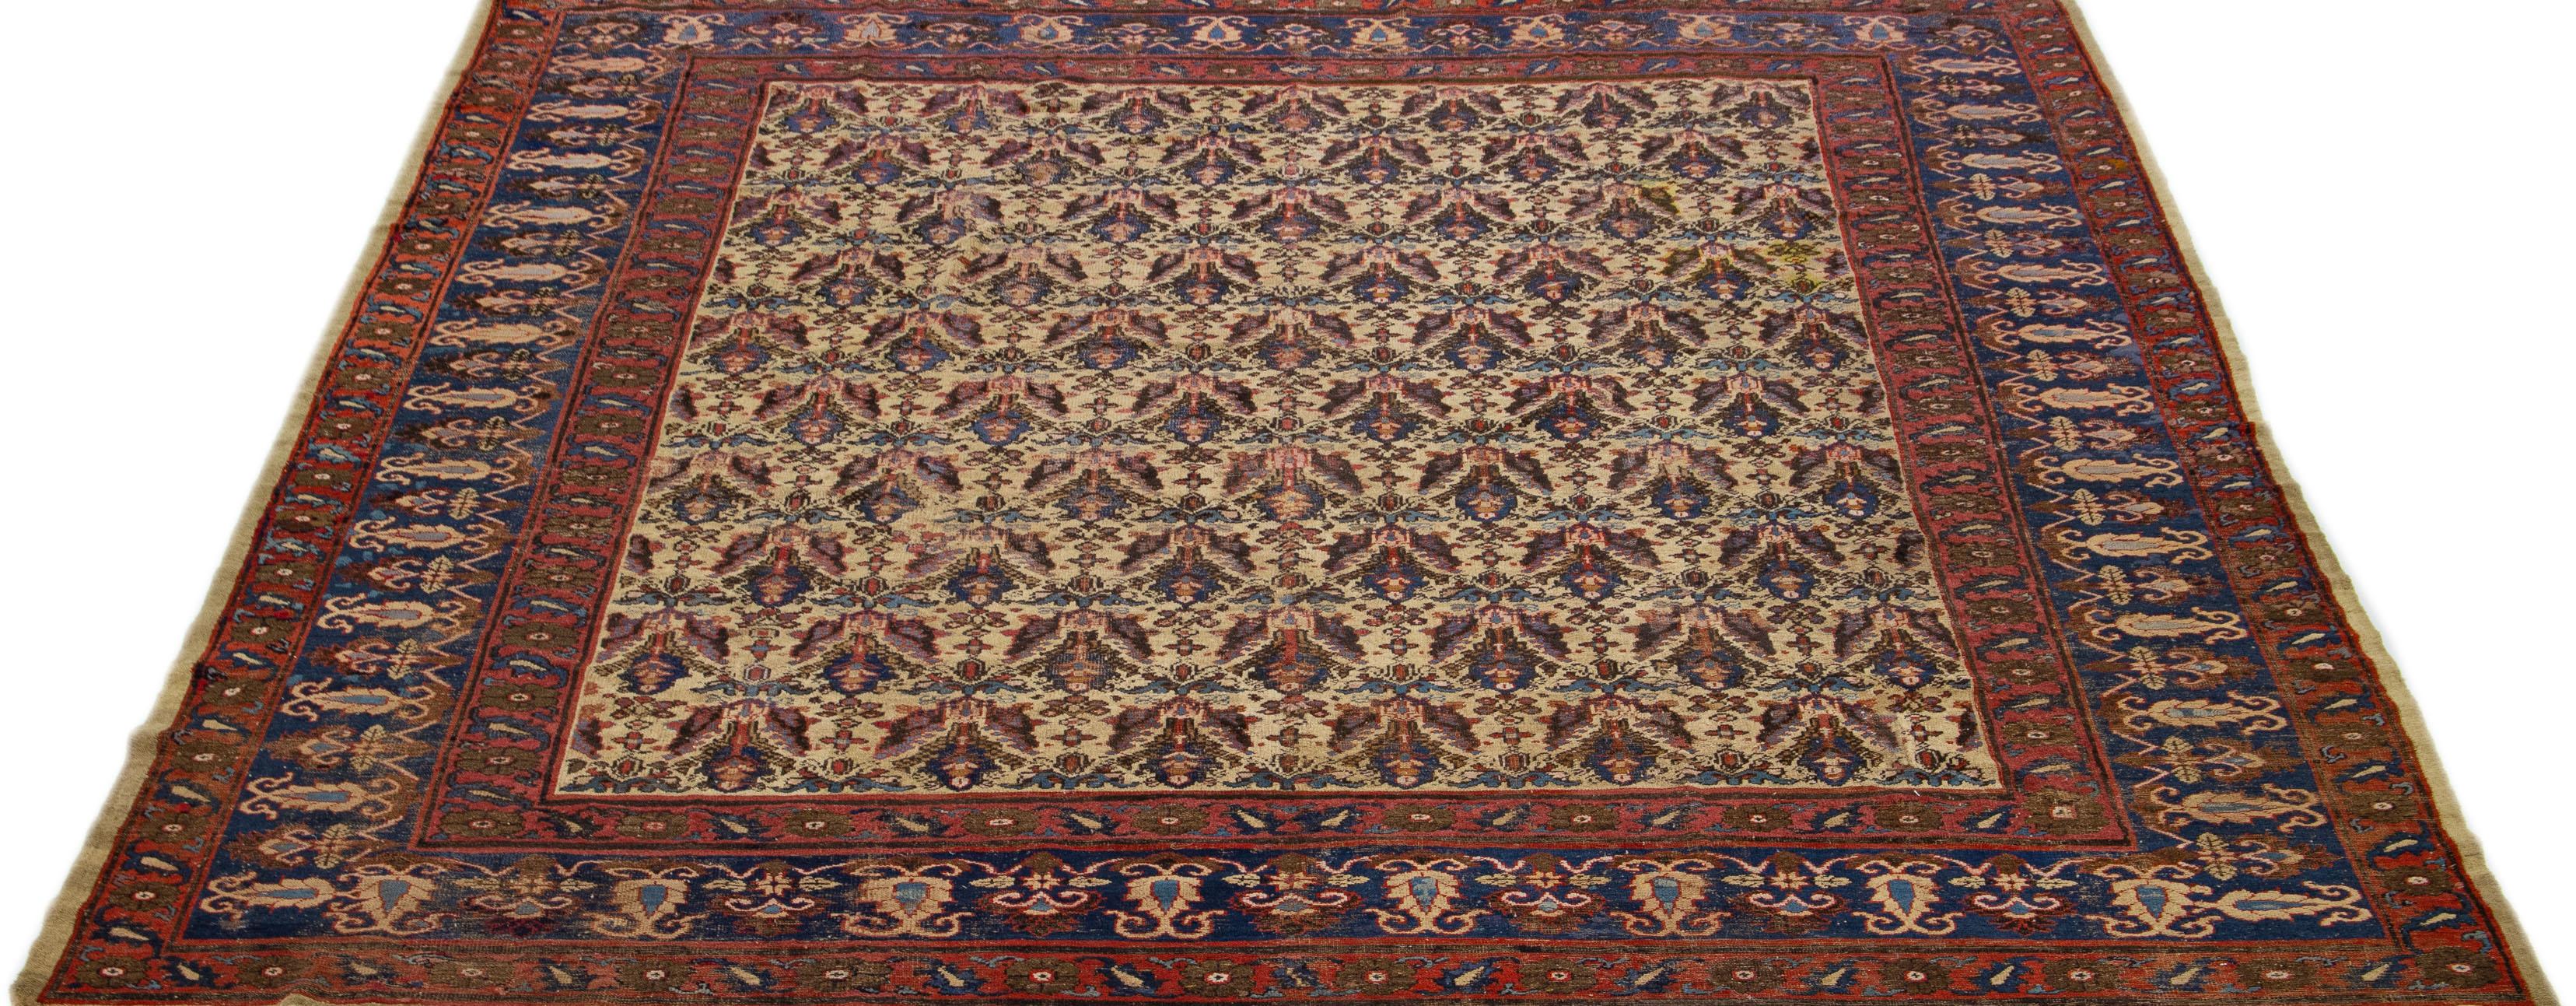 Early 20th Century 1920s Square Indian Agra Wool Rug with Allover Design in Brown For Sale